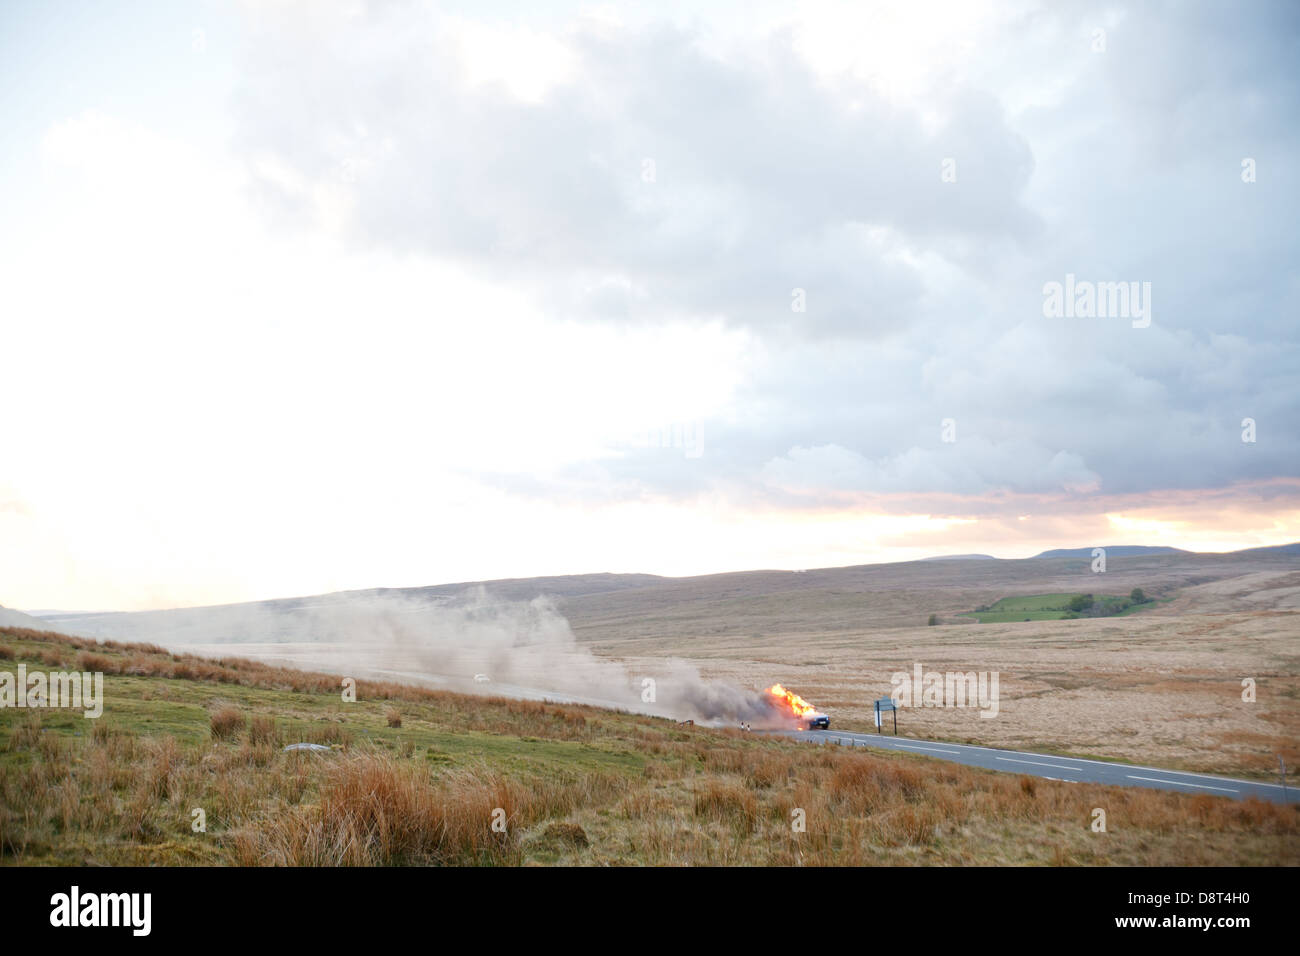 A landrover discovery catches fire on the A4059 between Hirwaun and Brecon. The vehicle burns as the sun sets over the hills. Stock Photo